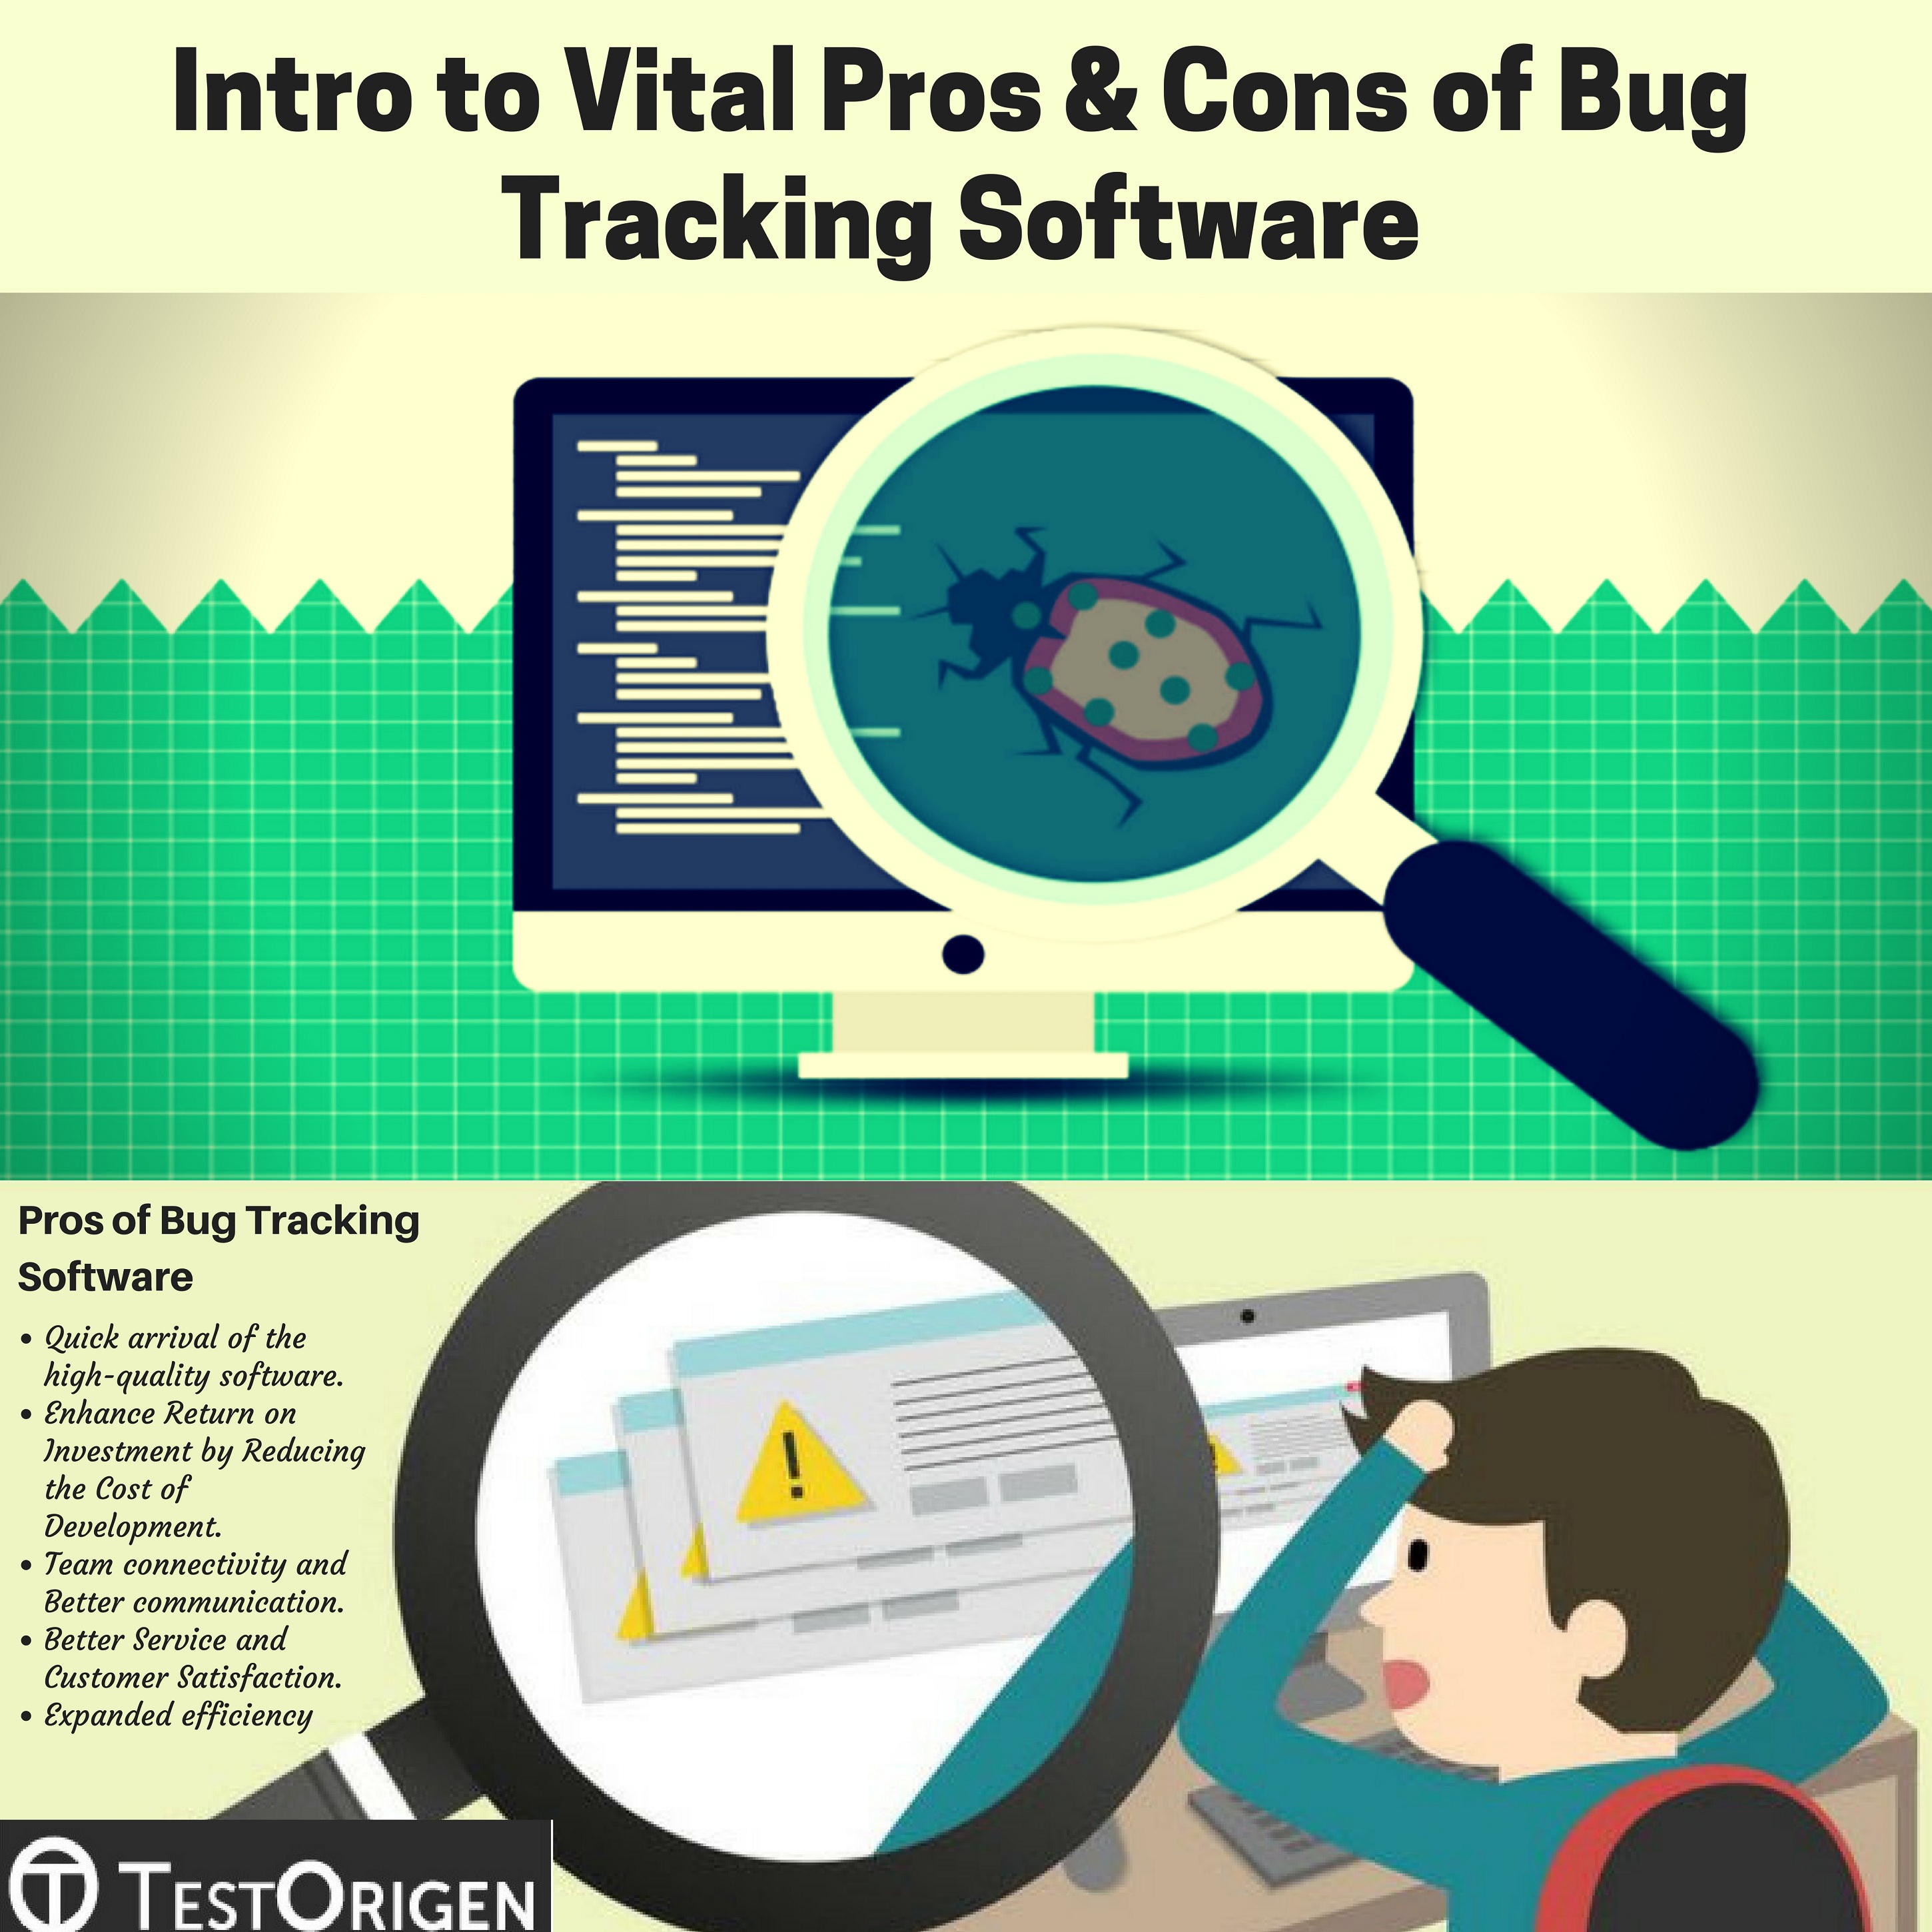 Intro to Vital Pros & Cons of Bug Tracking Software